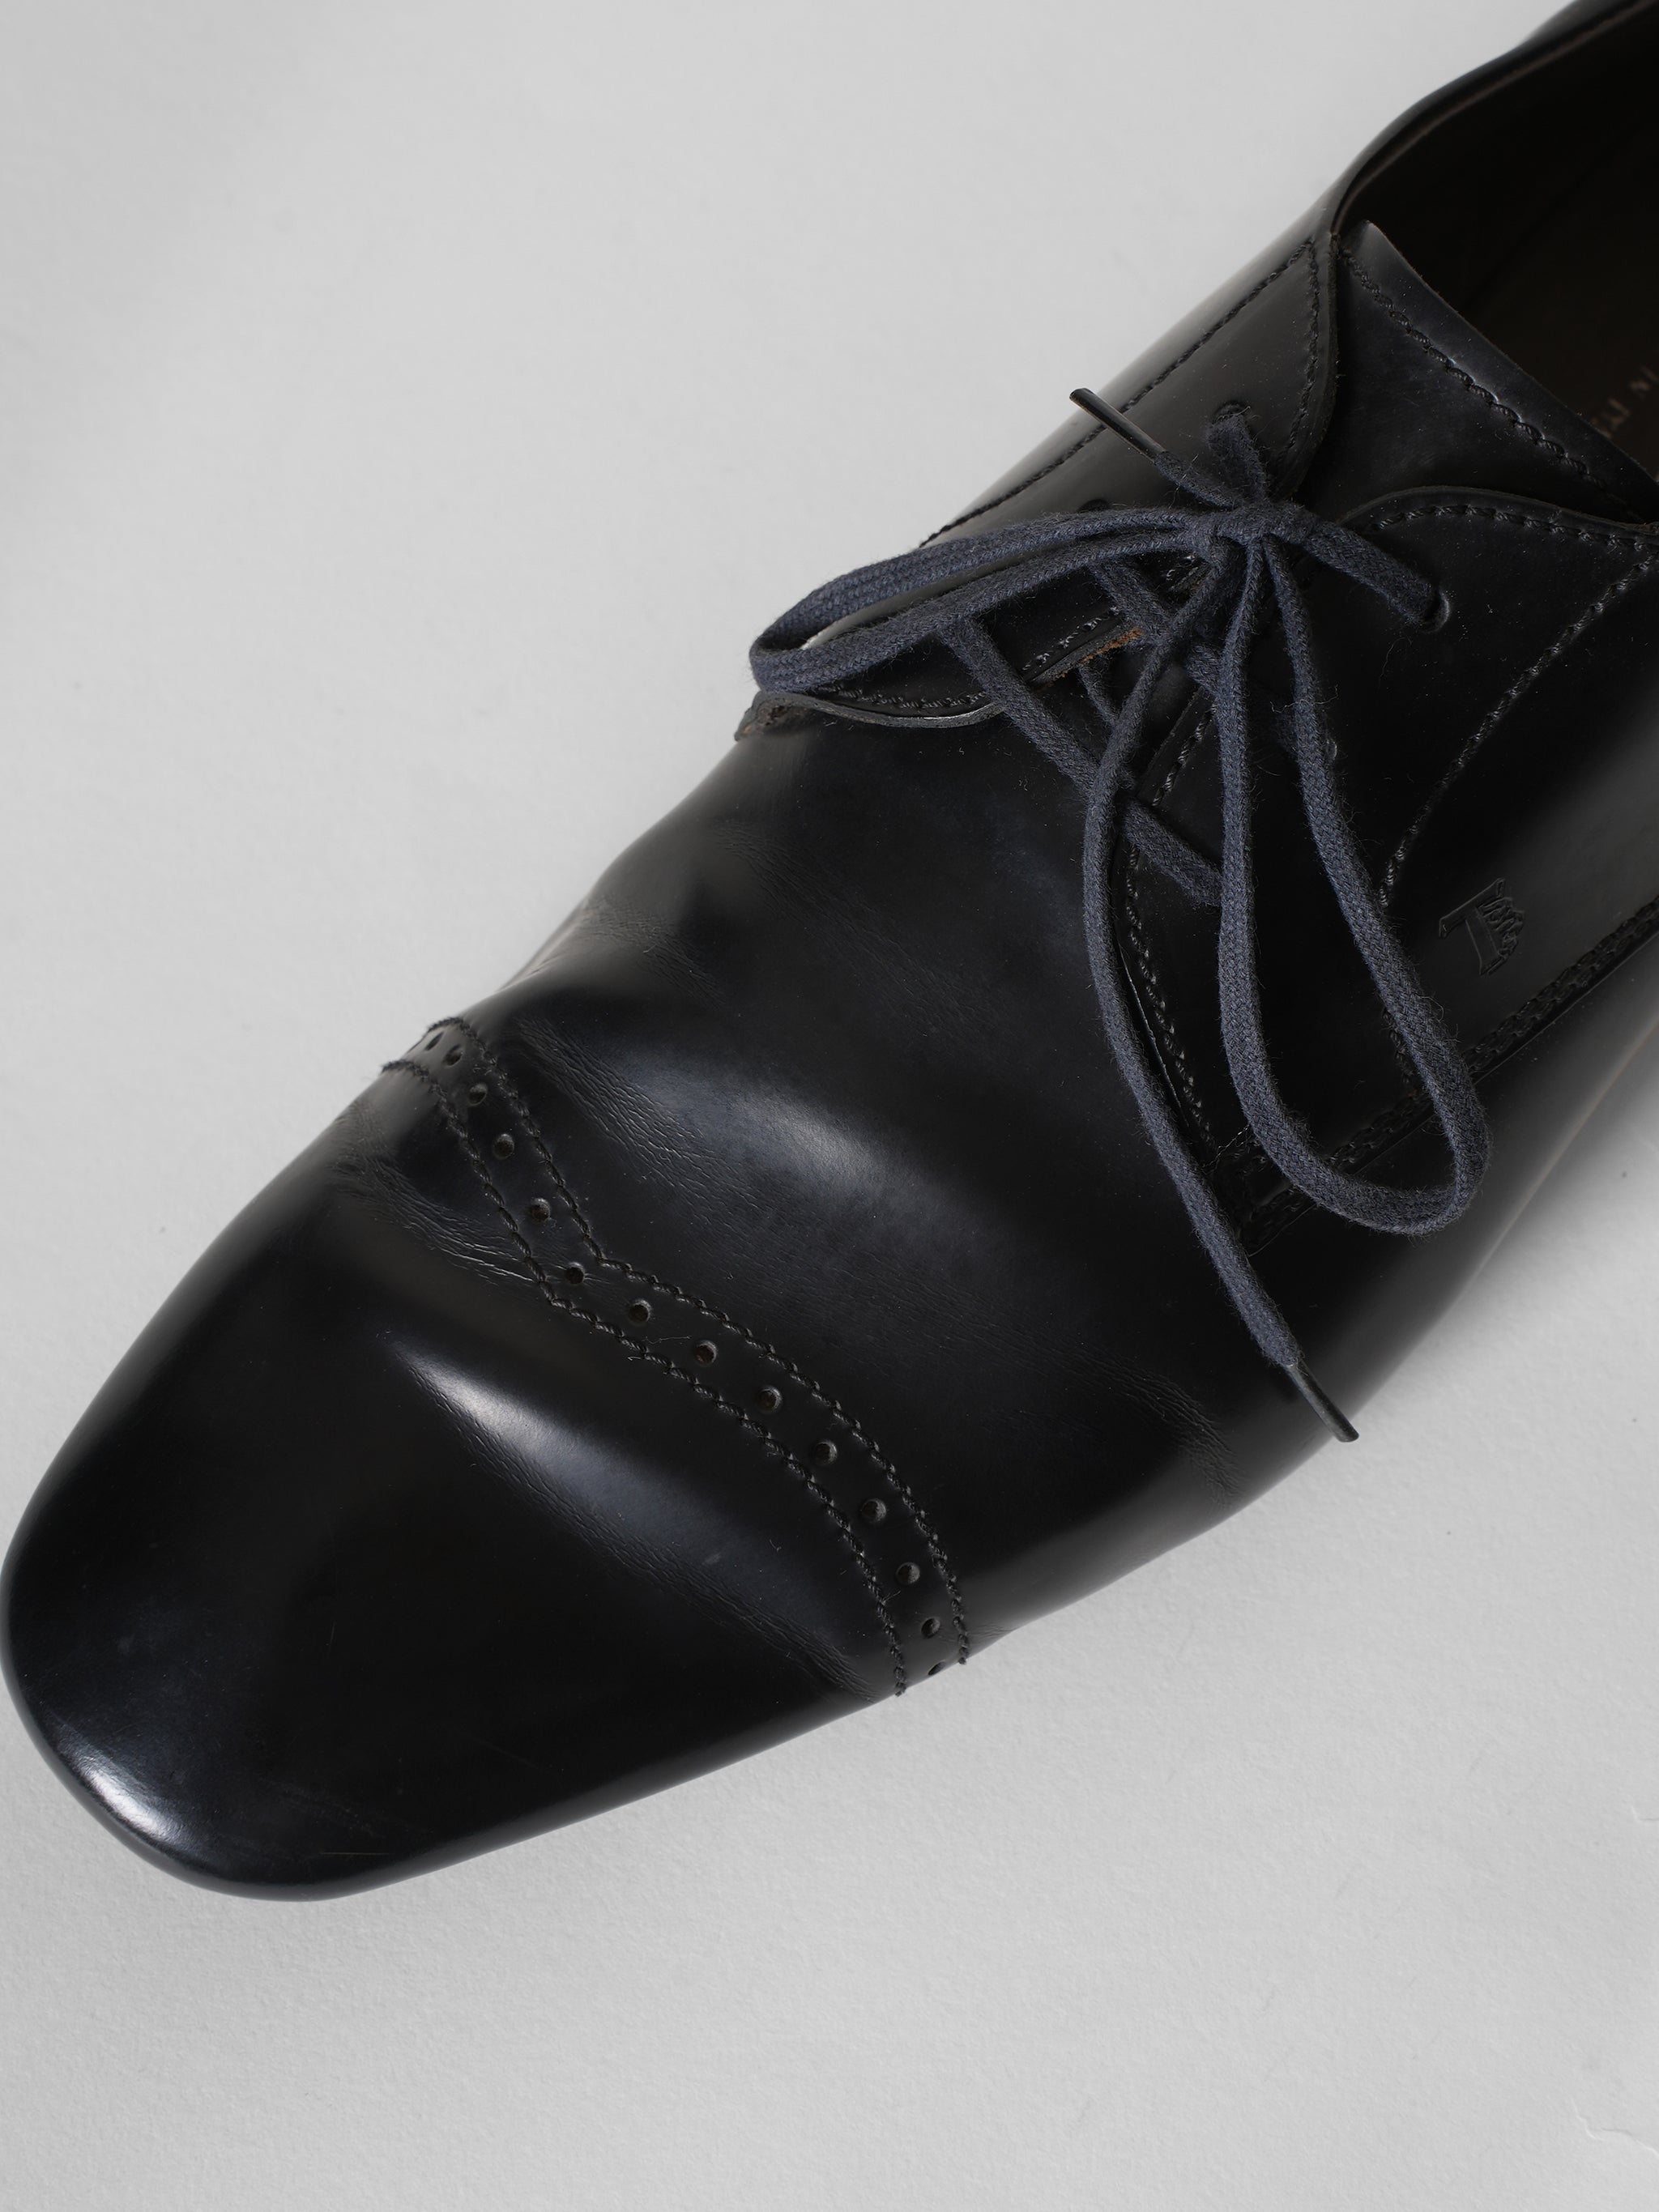 Tods Lace Up Formal Shoes